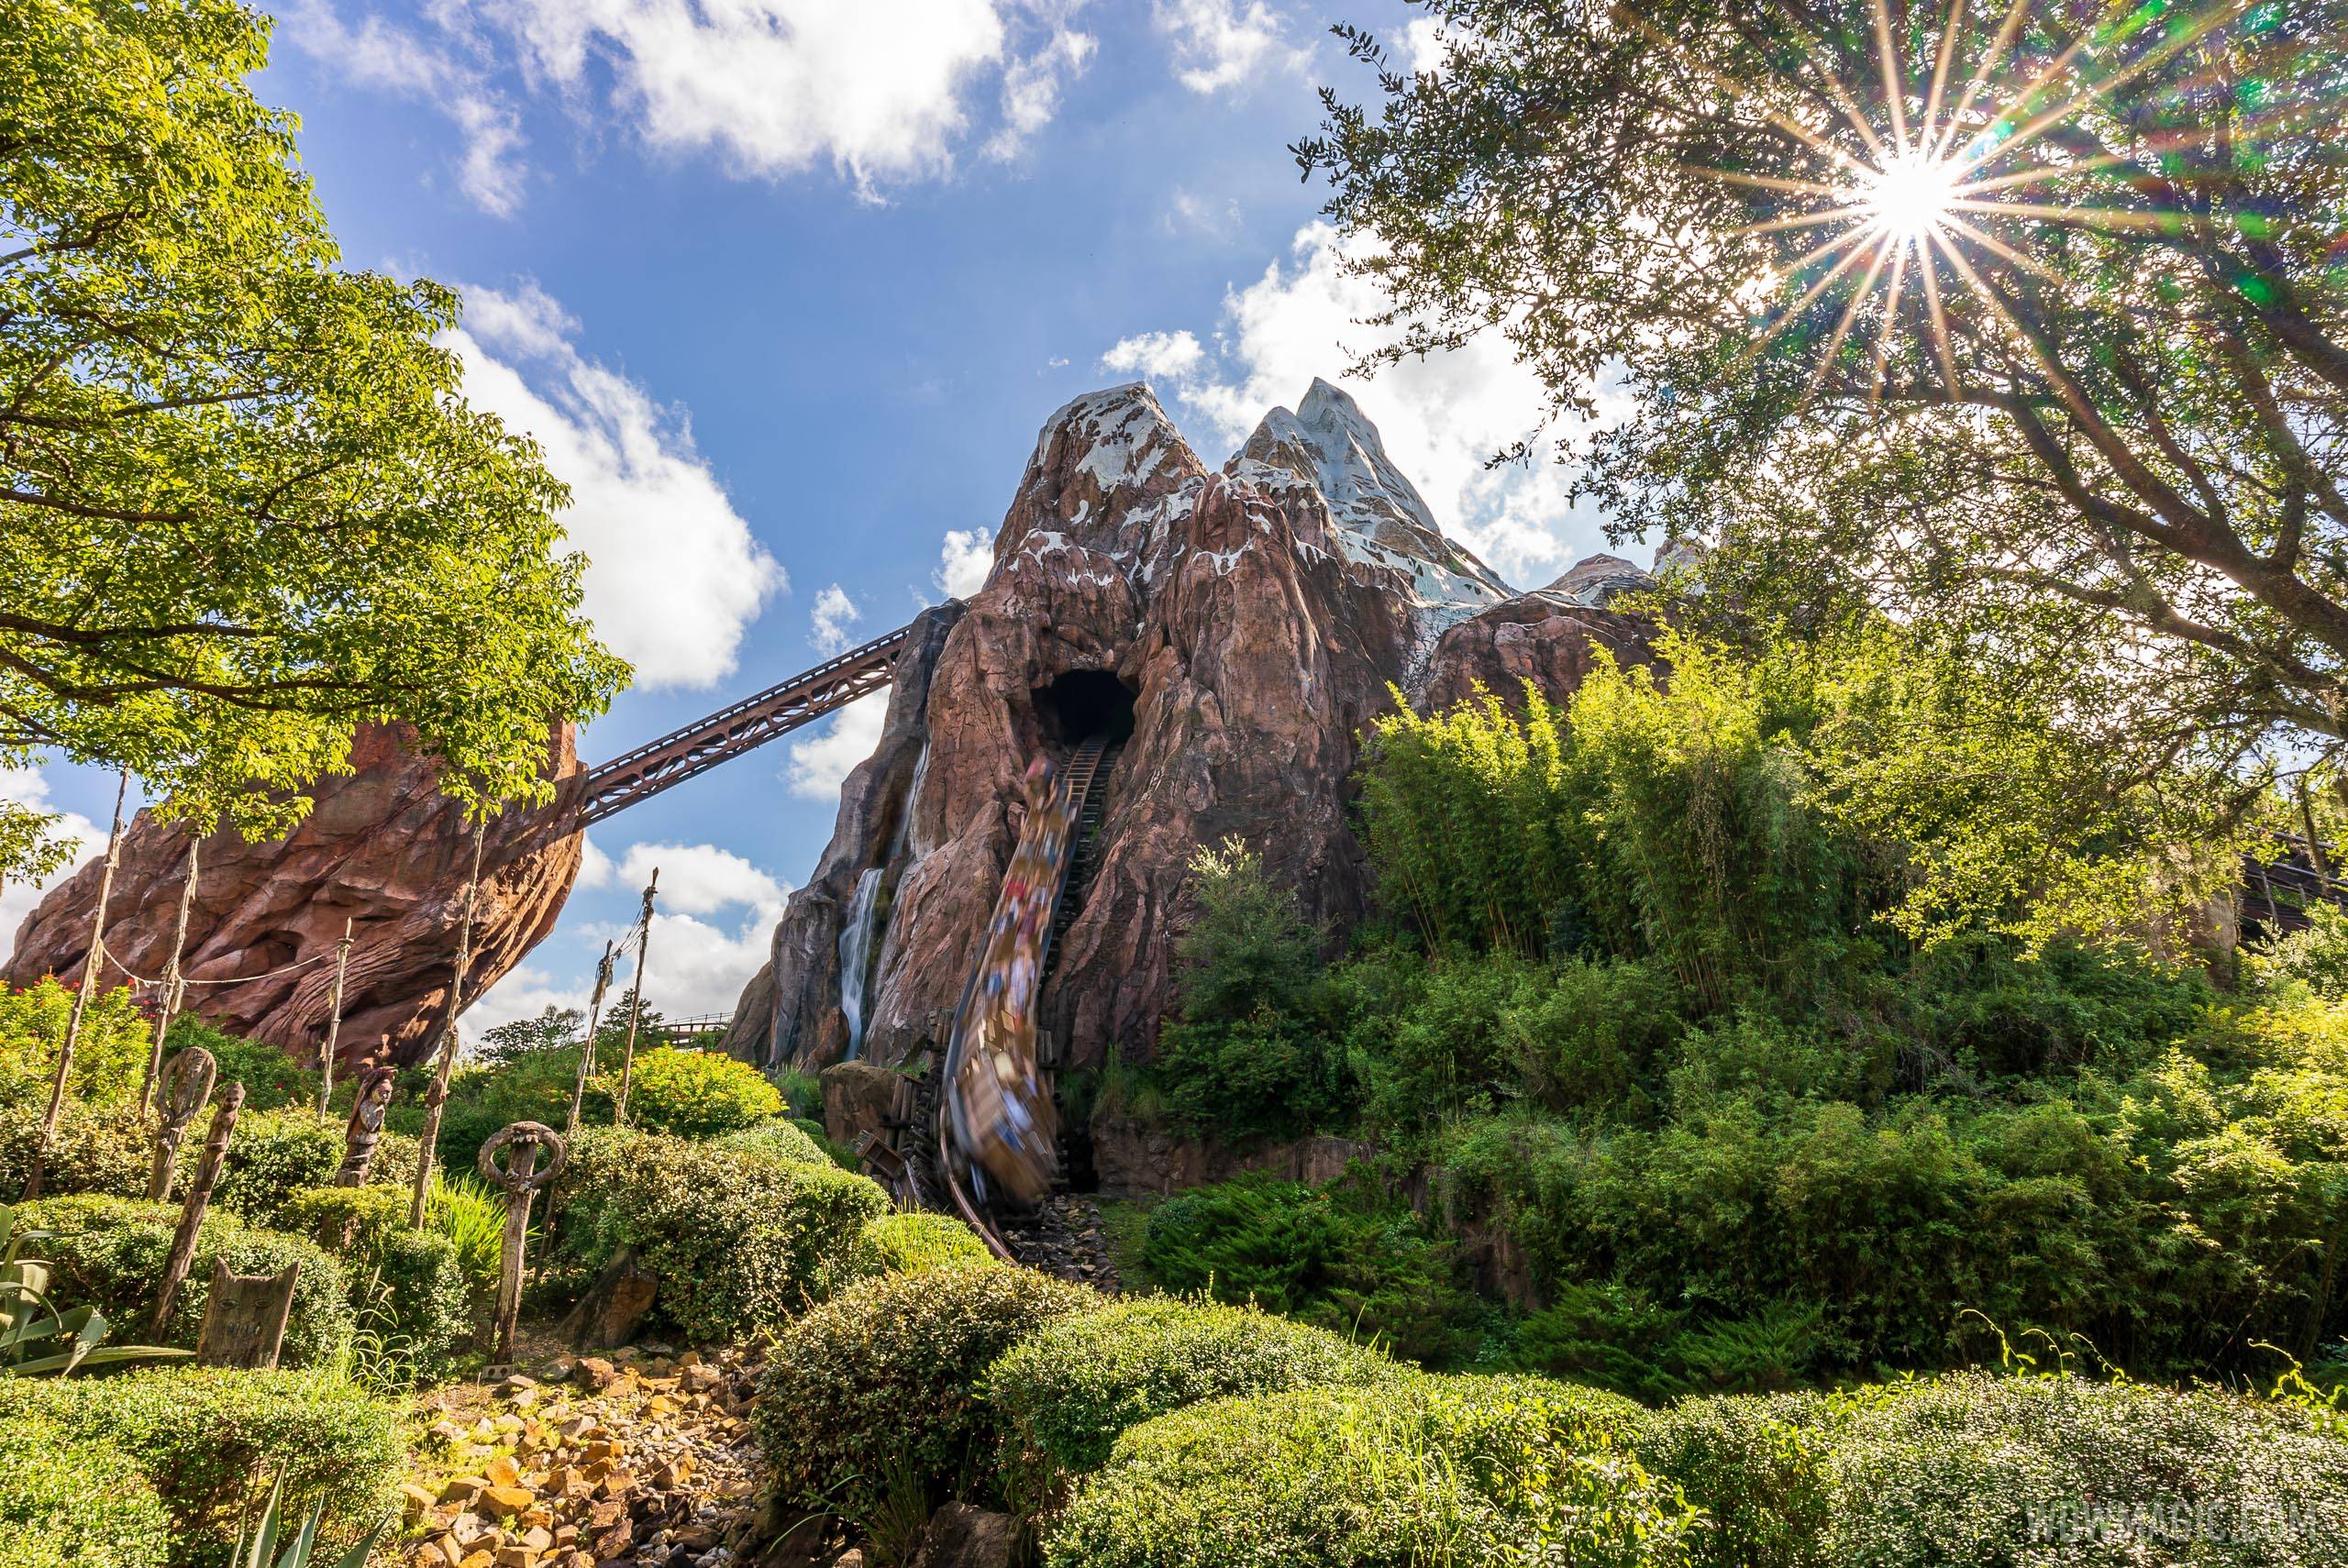 Disney World's Expedition Everest rollercoaster experiencing extended downtimes